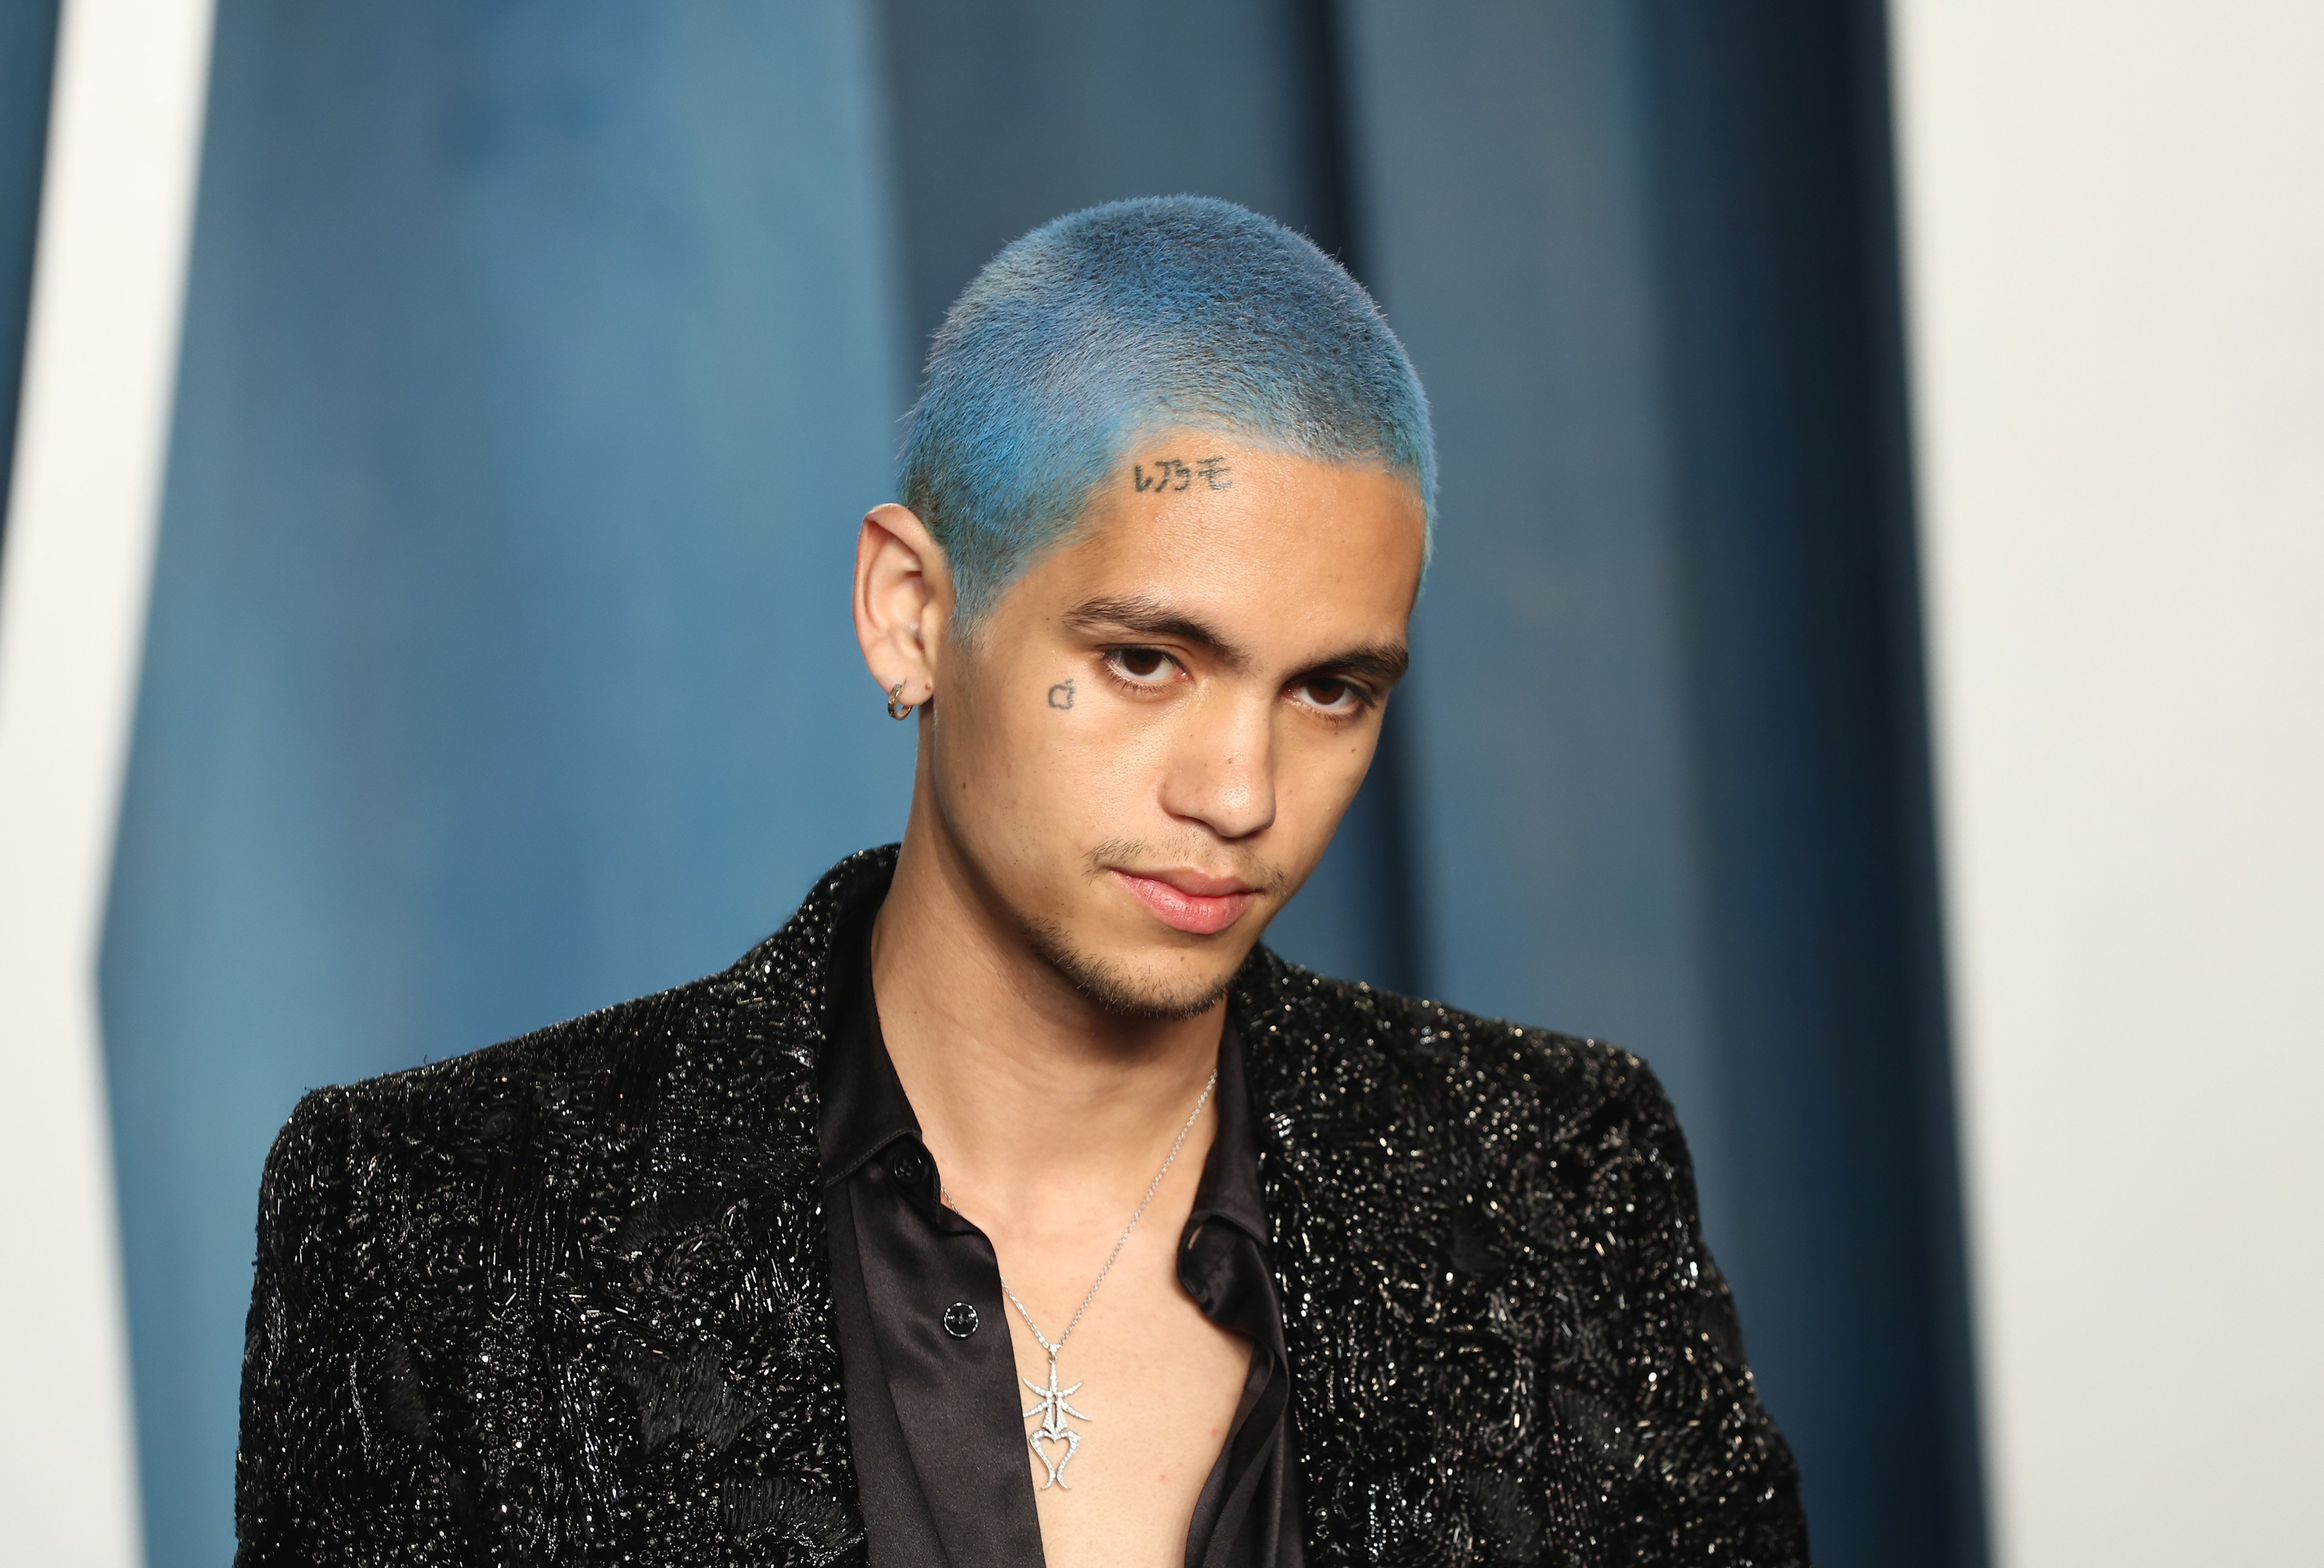 Dominic Fike's Blue Hair Inspires Fans to Try the Trend Themselves - wide 11